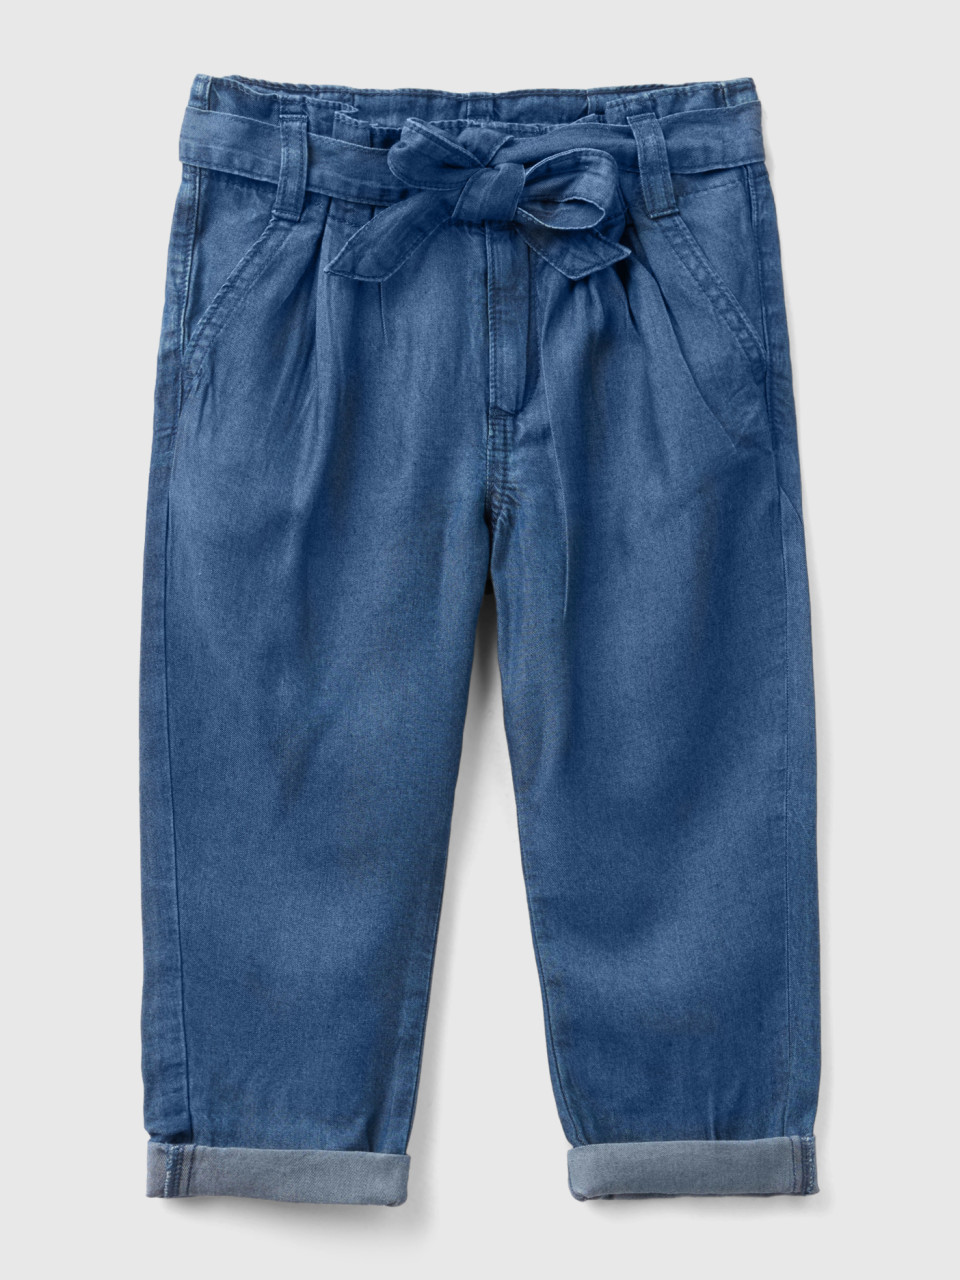 Benetton, Paperbag Trousers With Belt, Blue, Kids